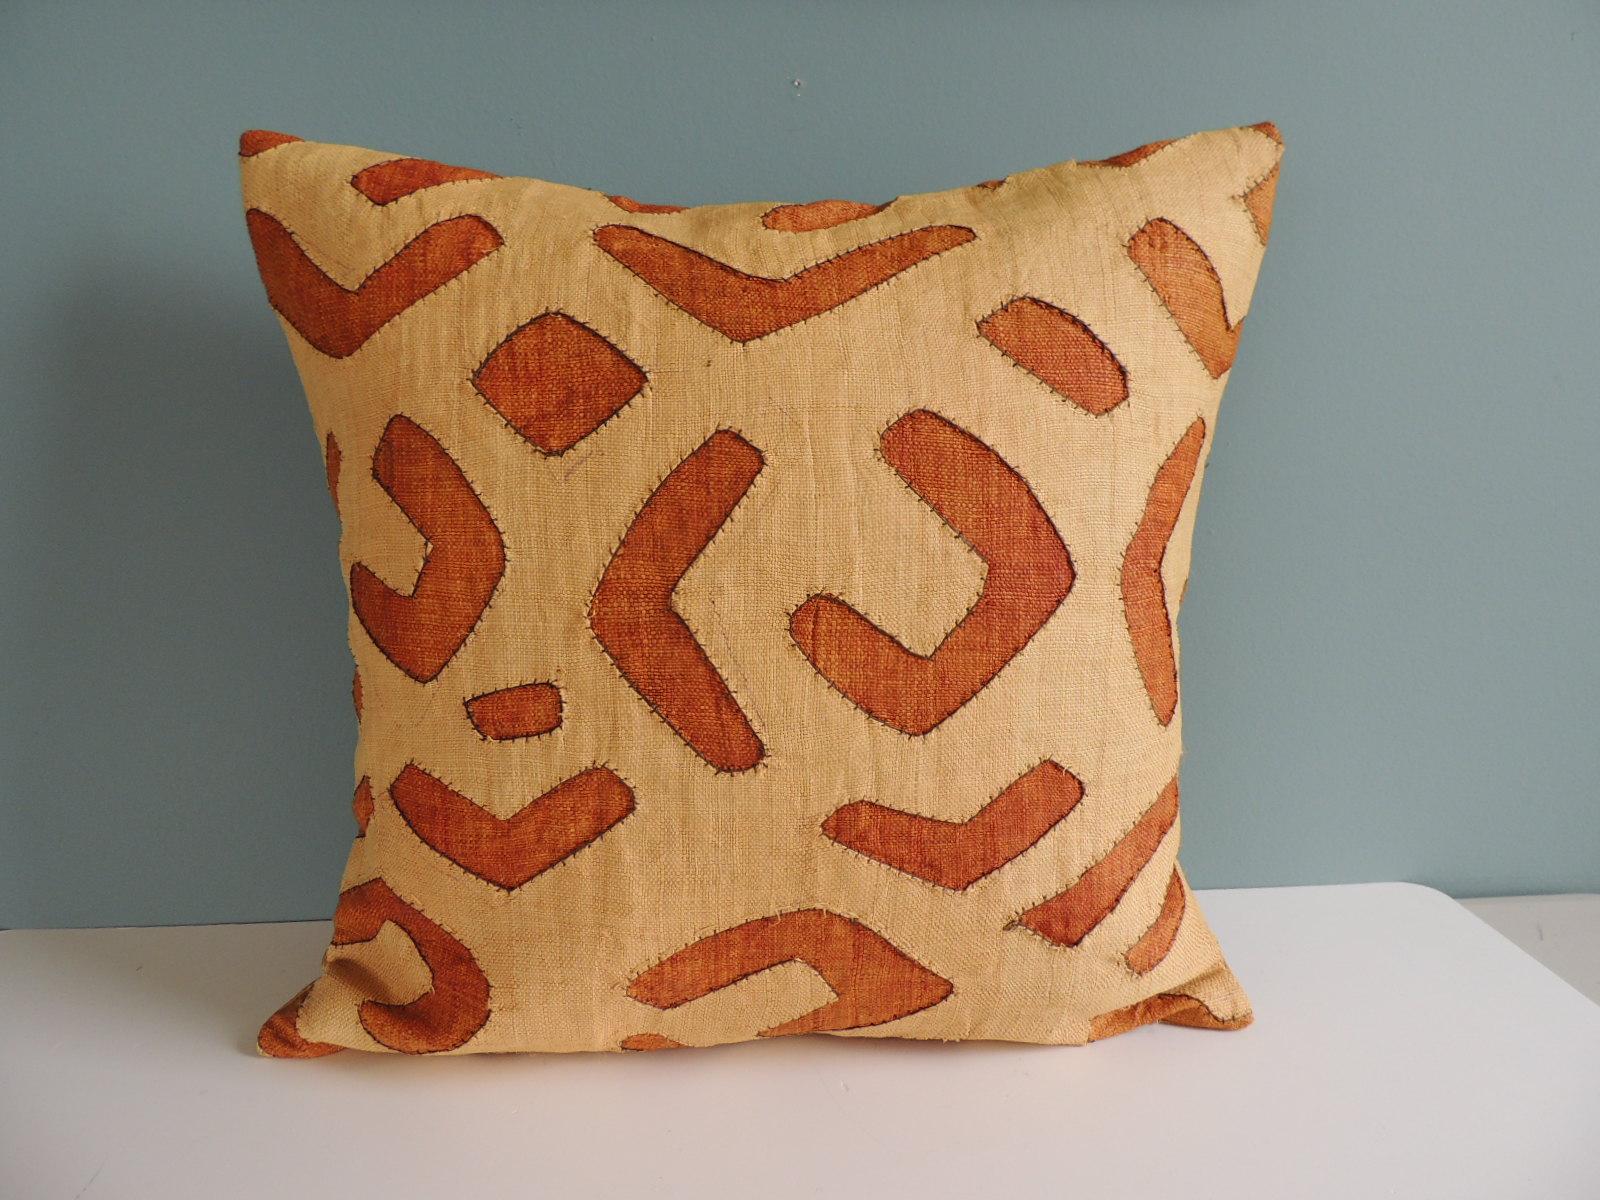 Vintage Tan and Camel African Raffia Kuba Textile Square Decorative Pillow with golden silk backing.
Decorative pillow handcrafted and designed in the USA.
Closure by stitch (no zipper closure) with custom-made feather/Down pillow insert.
Offered By